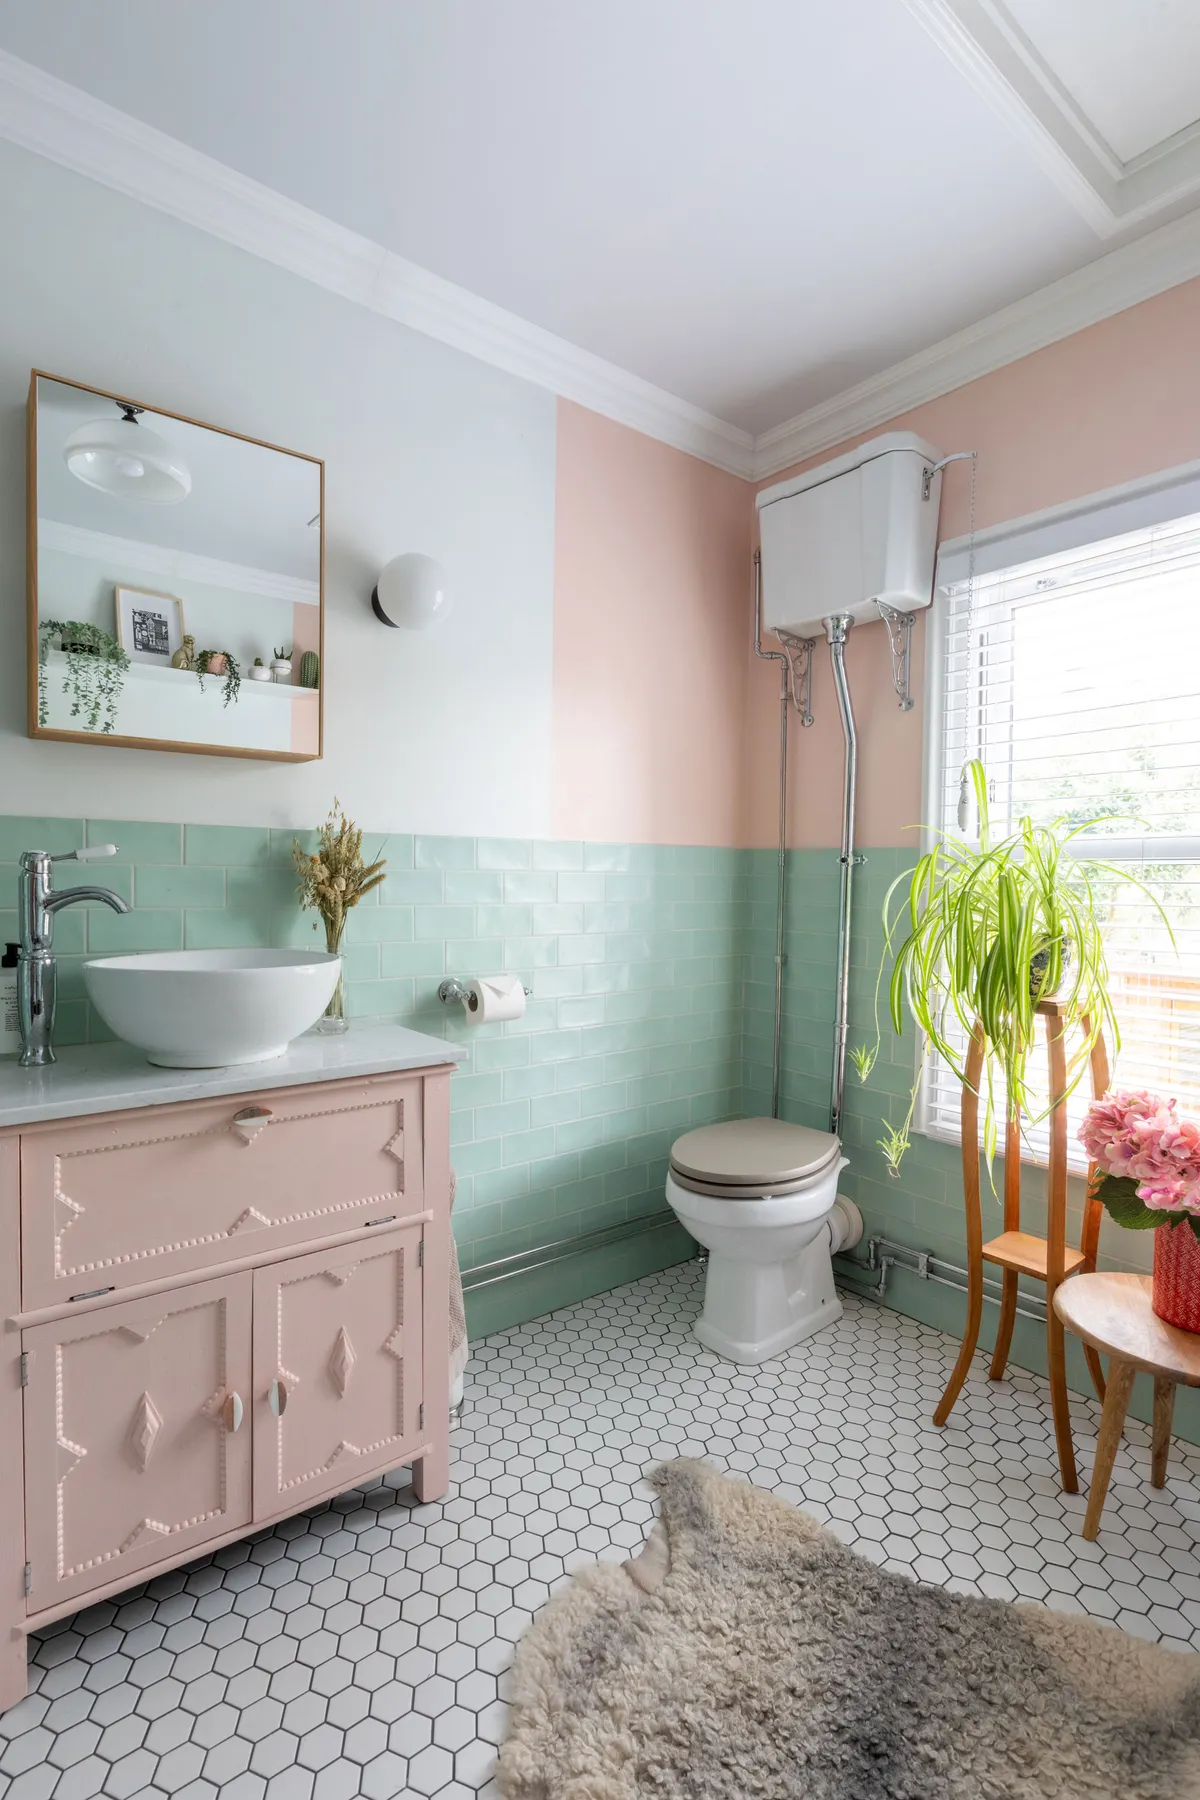 Rather than buying a ready-made sink unit, try a budget-friendly, DIY solution. Carey made hers from an old cupboard and it’s now the centrepiece of her vintage-inspired scheme